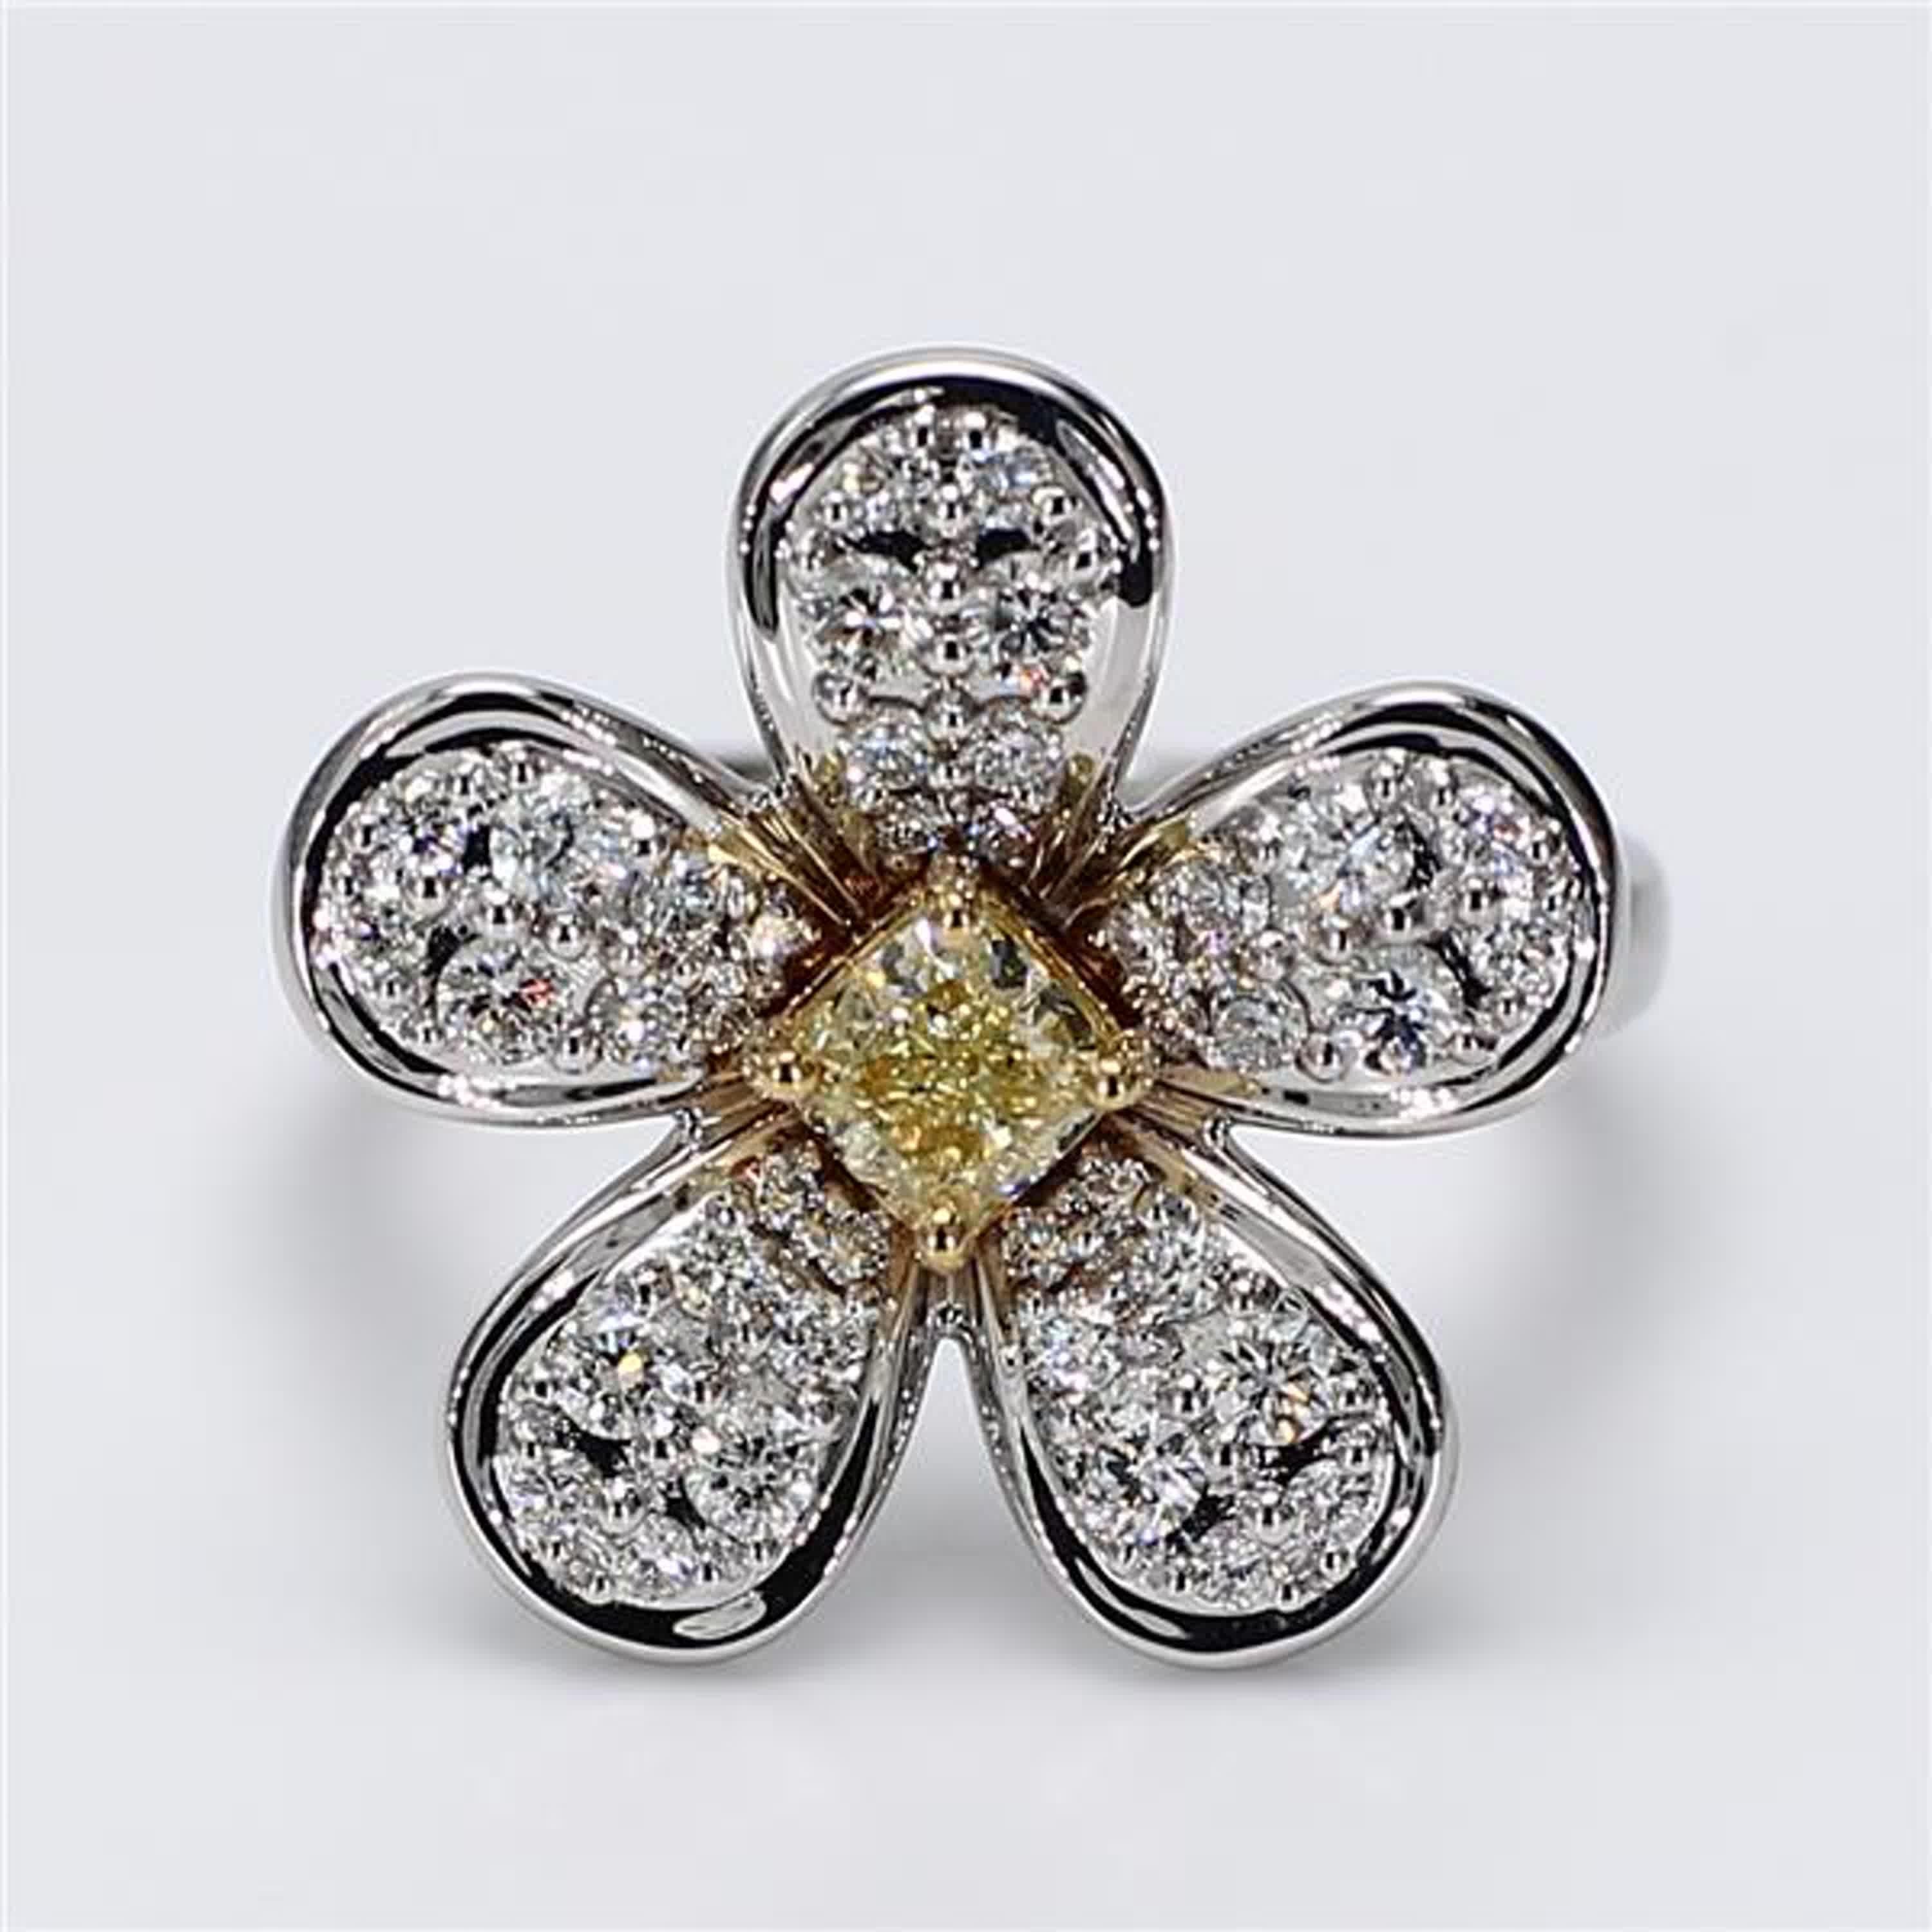 RareGemWorld's classic diamond ring. Mounted in a beautiful 18K Yellow and White Gold setting with a natural cushion cut yellow diamond. The yellow diamond is surrounded by small round natural white diamond melee. This ring is guaranteed to impress